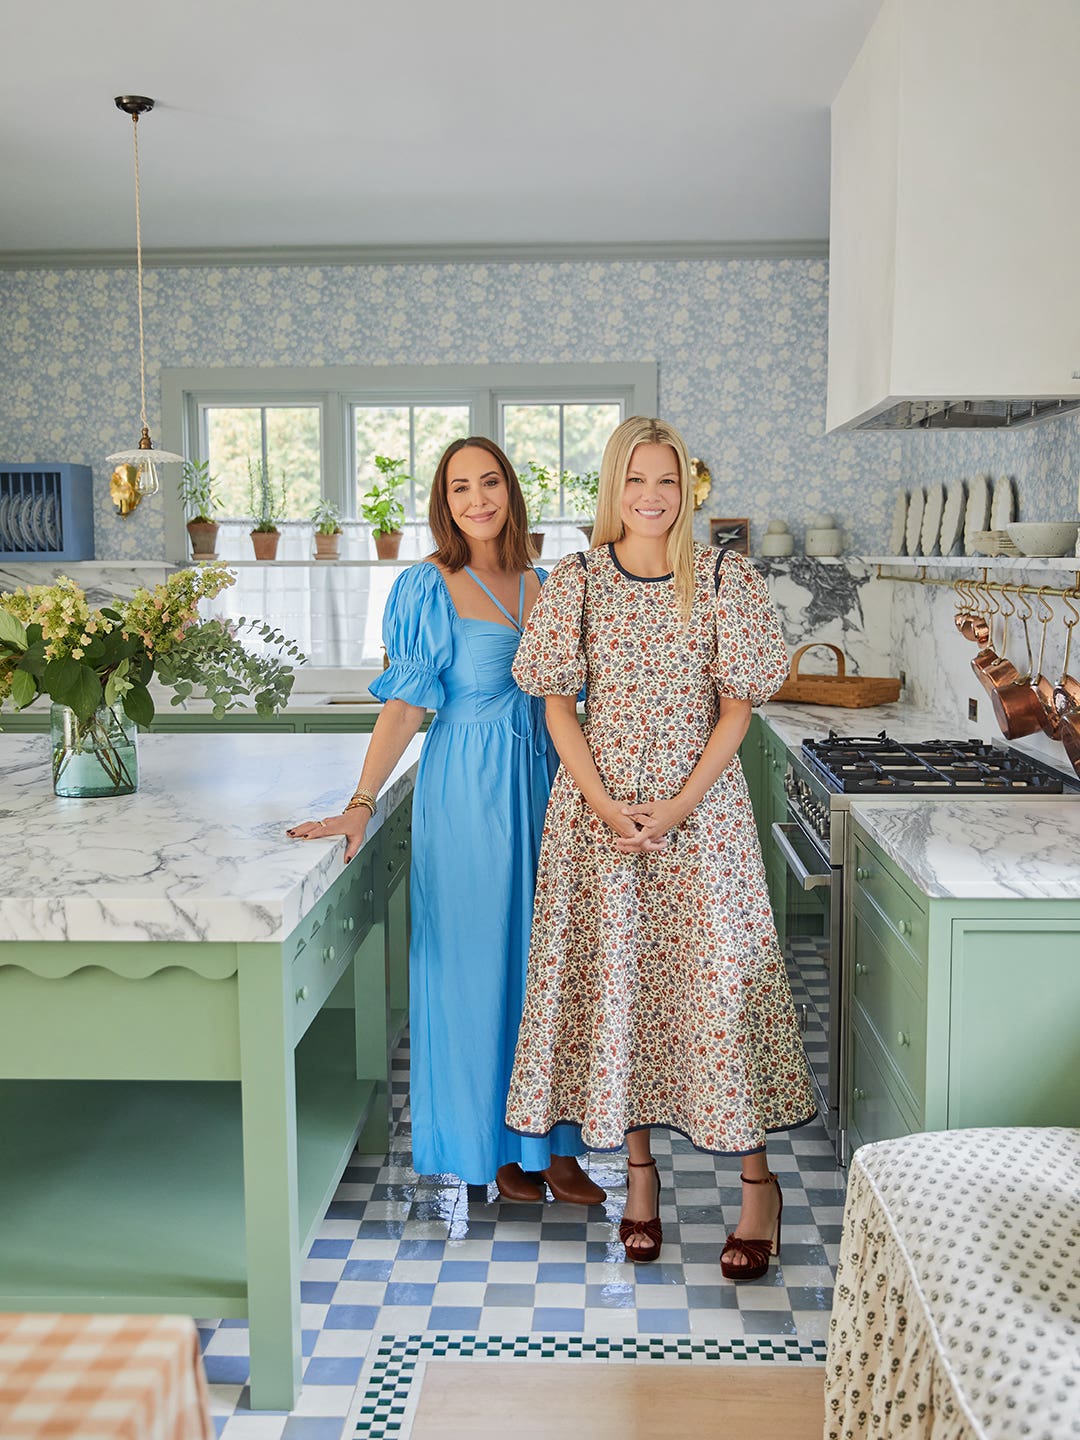 designer and owner standing in kitchen